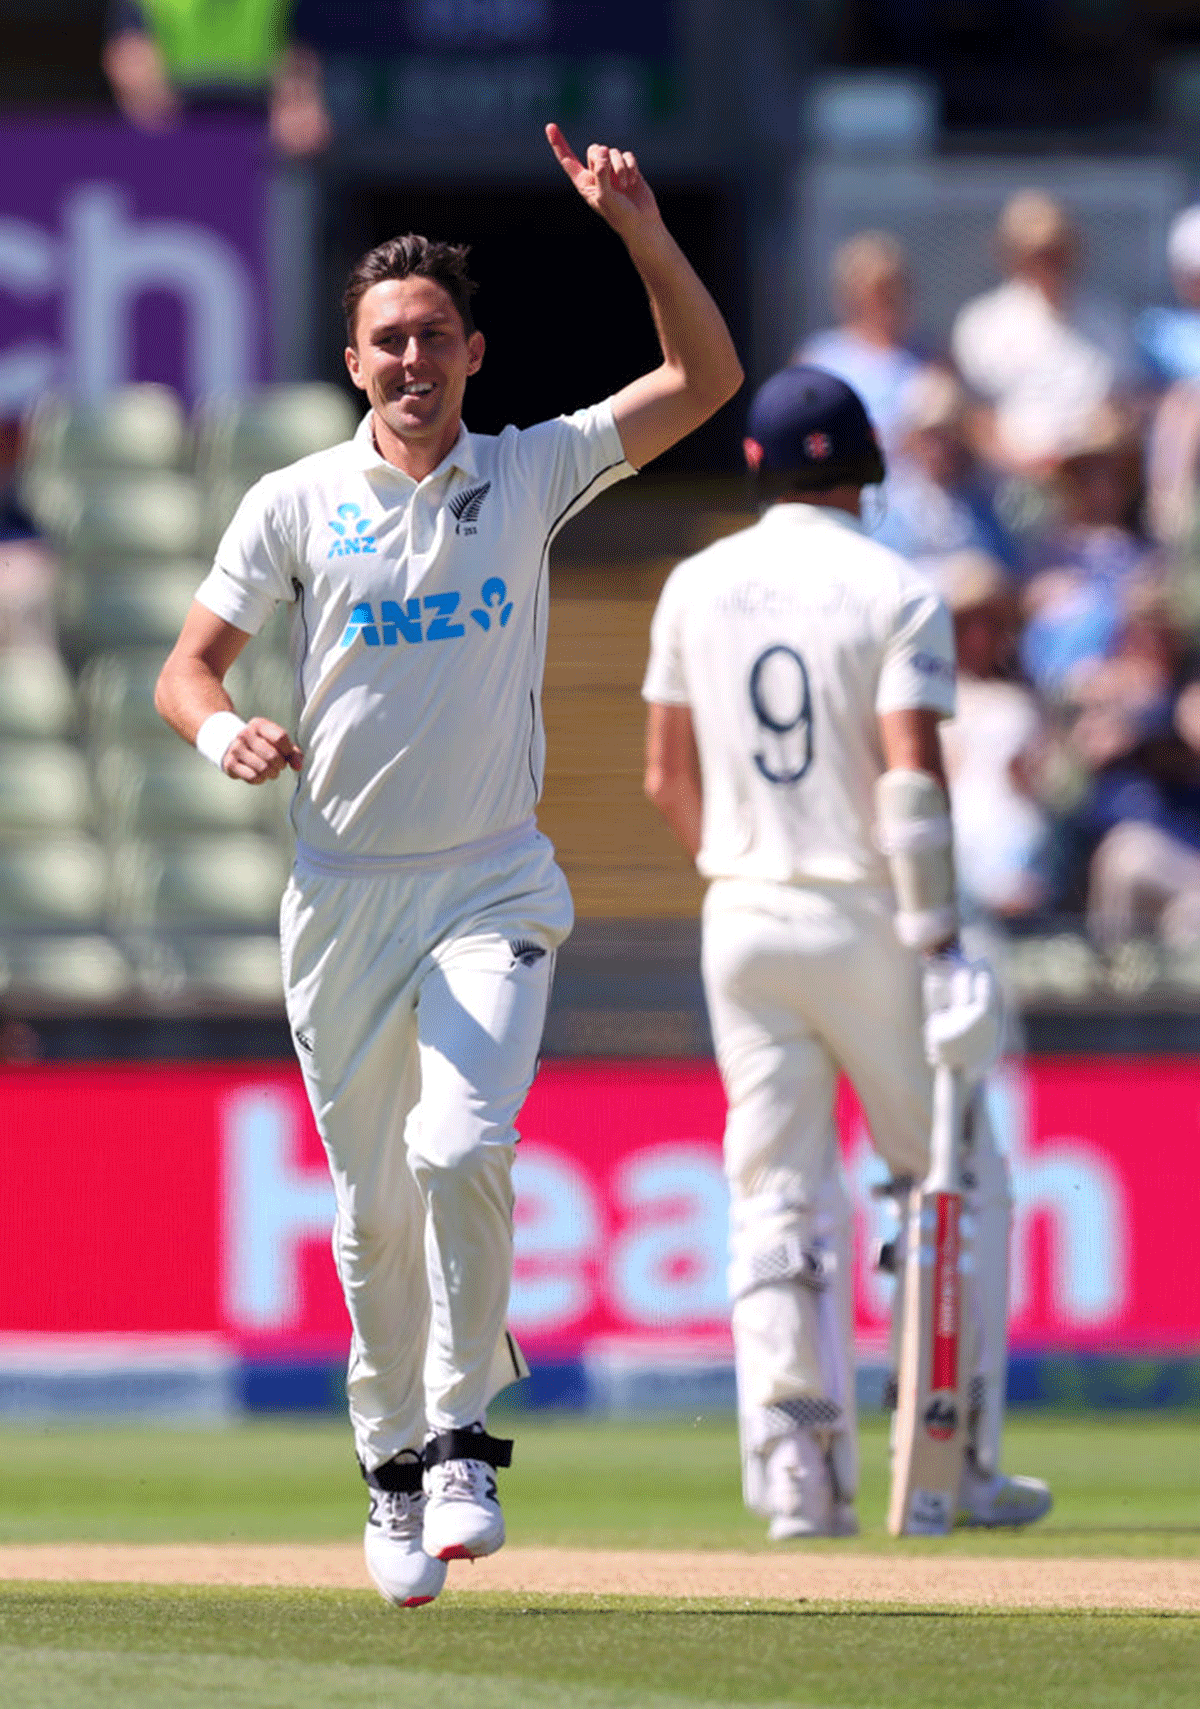 Seamer Trent Boult has been impressive with 376 Test wickets